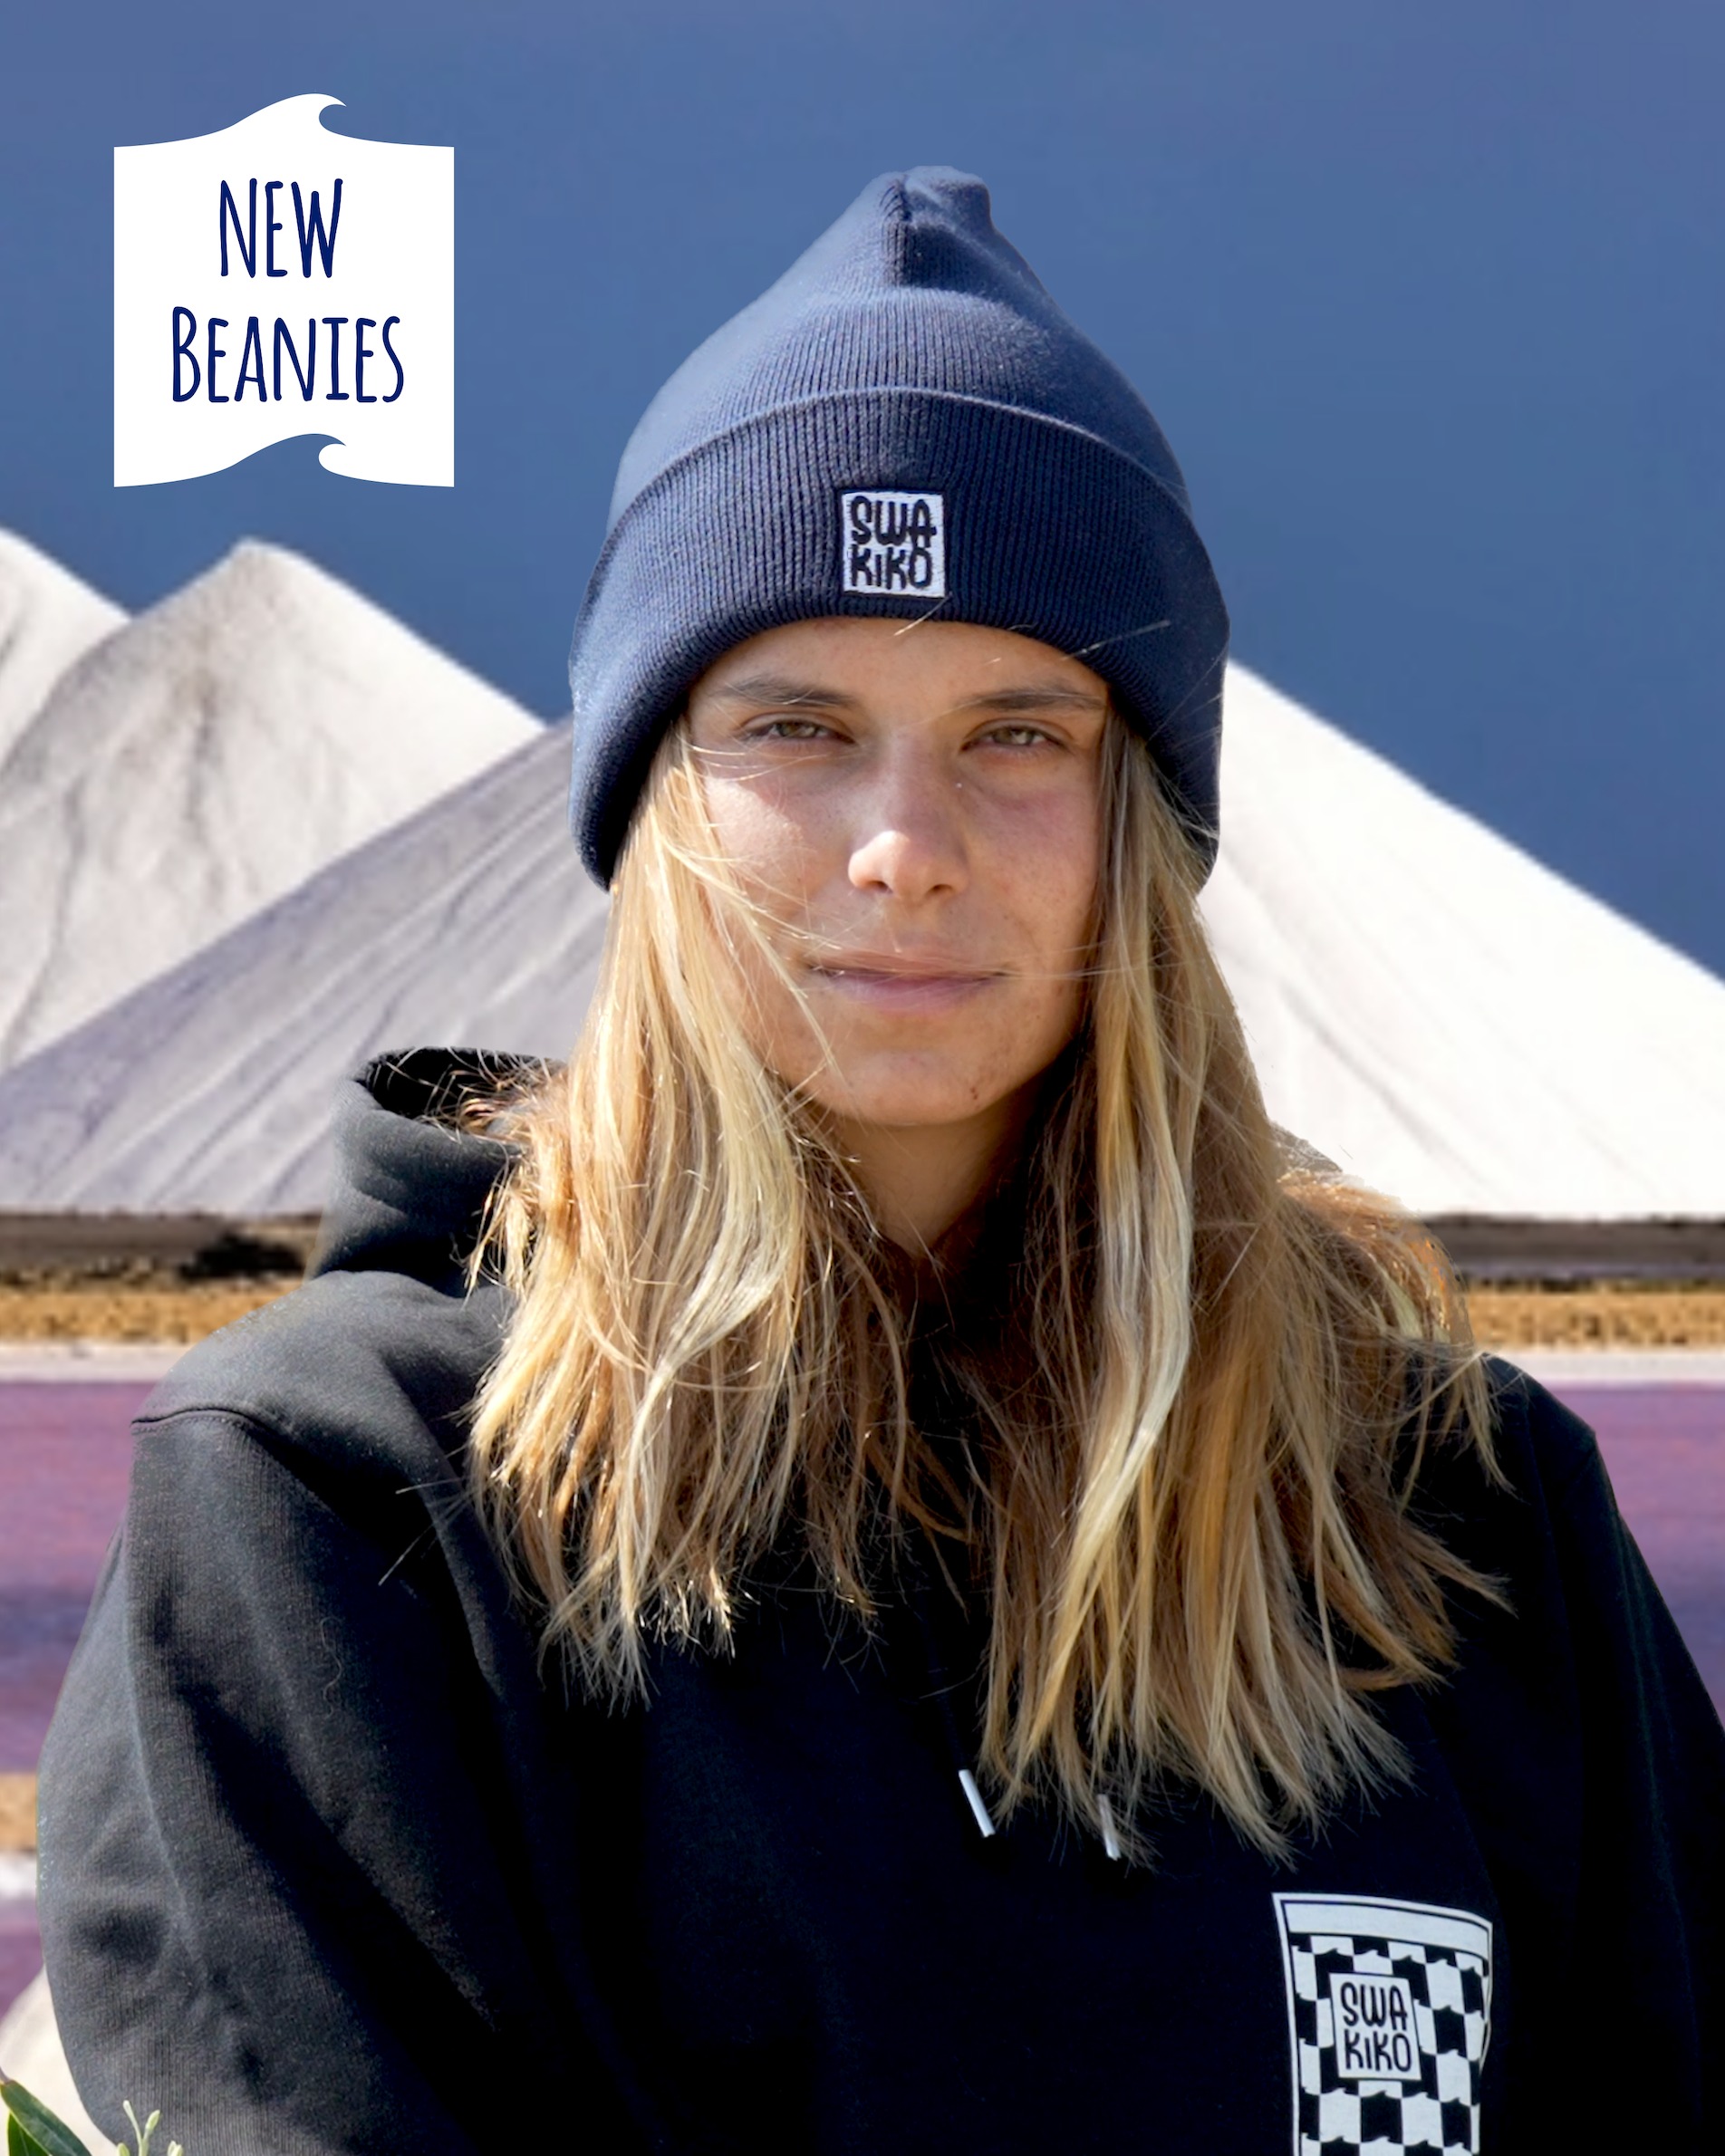 Shop Beanies - model with a warm SWAKiKO beanie for winter